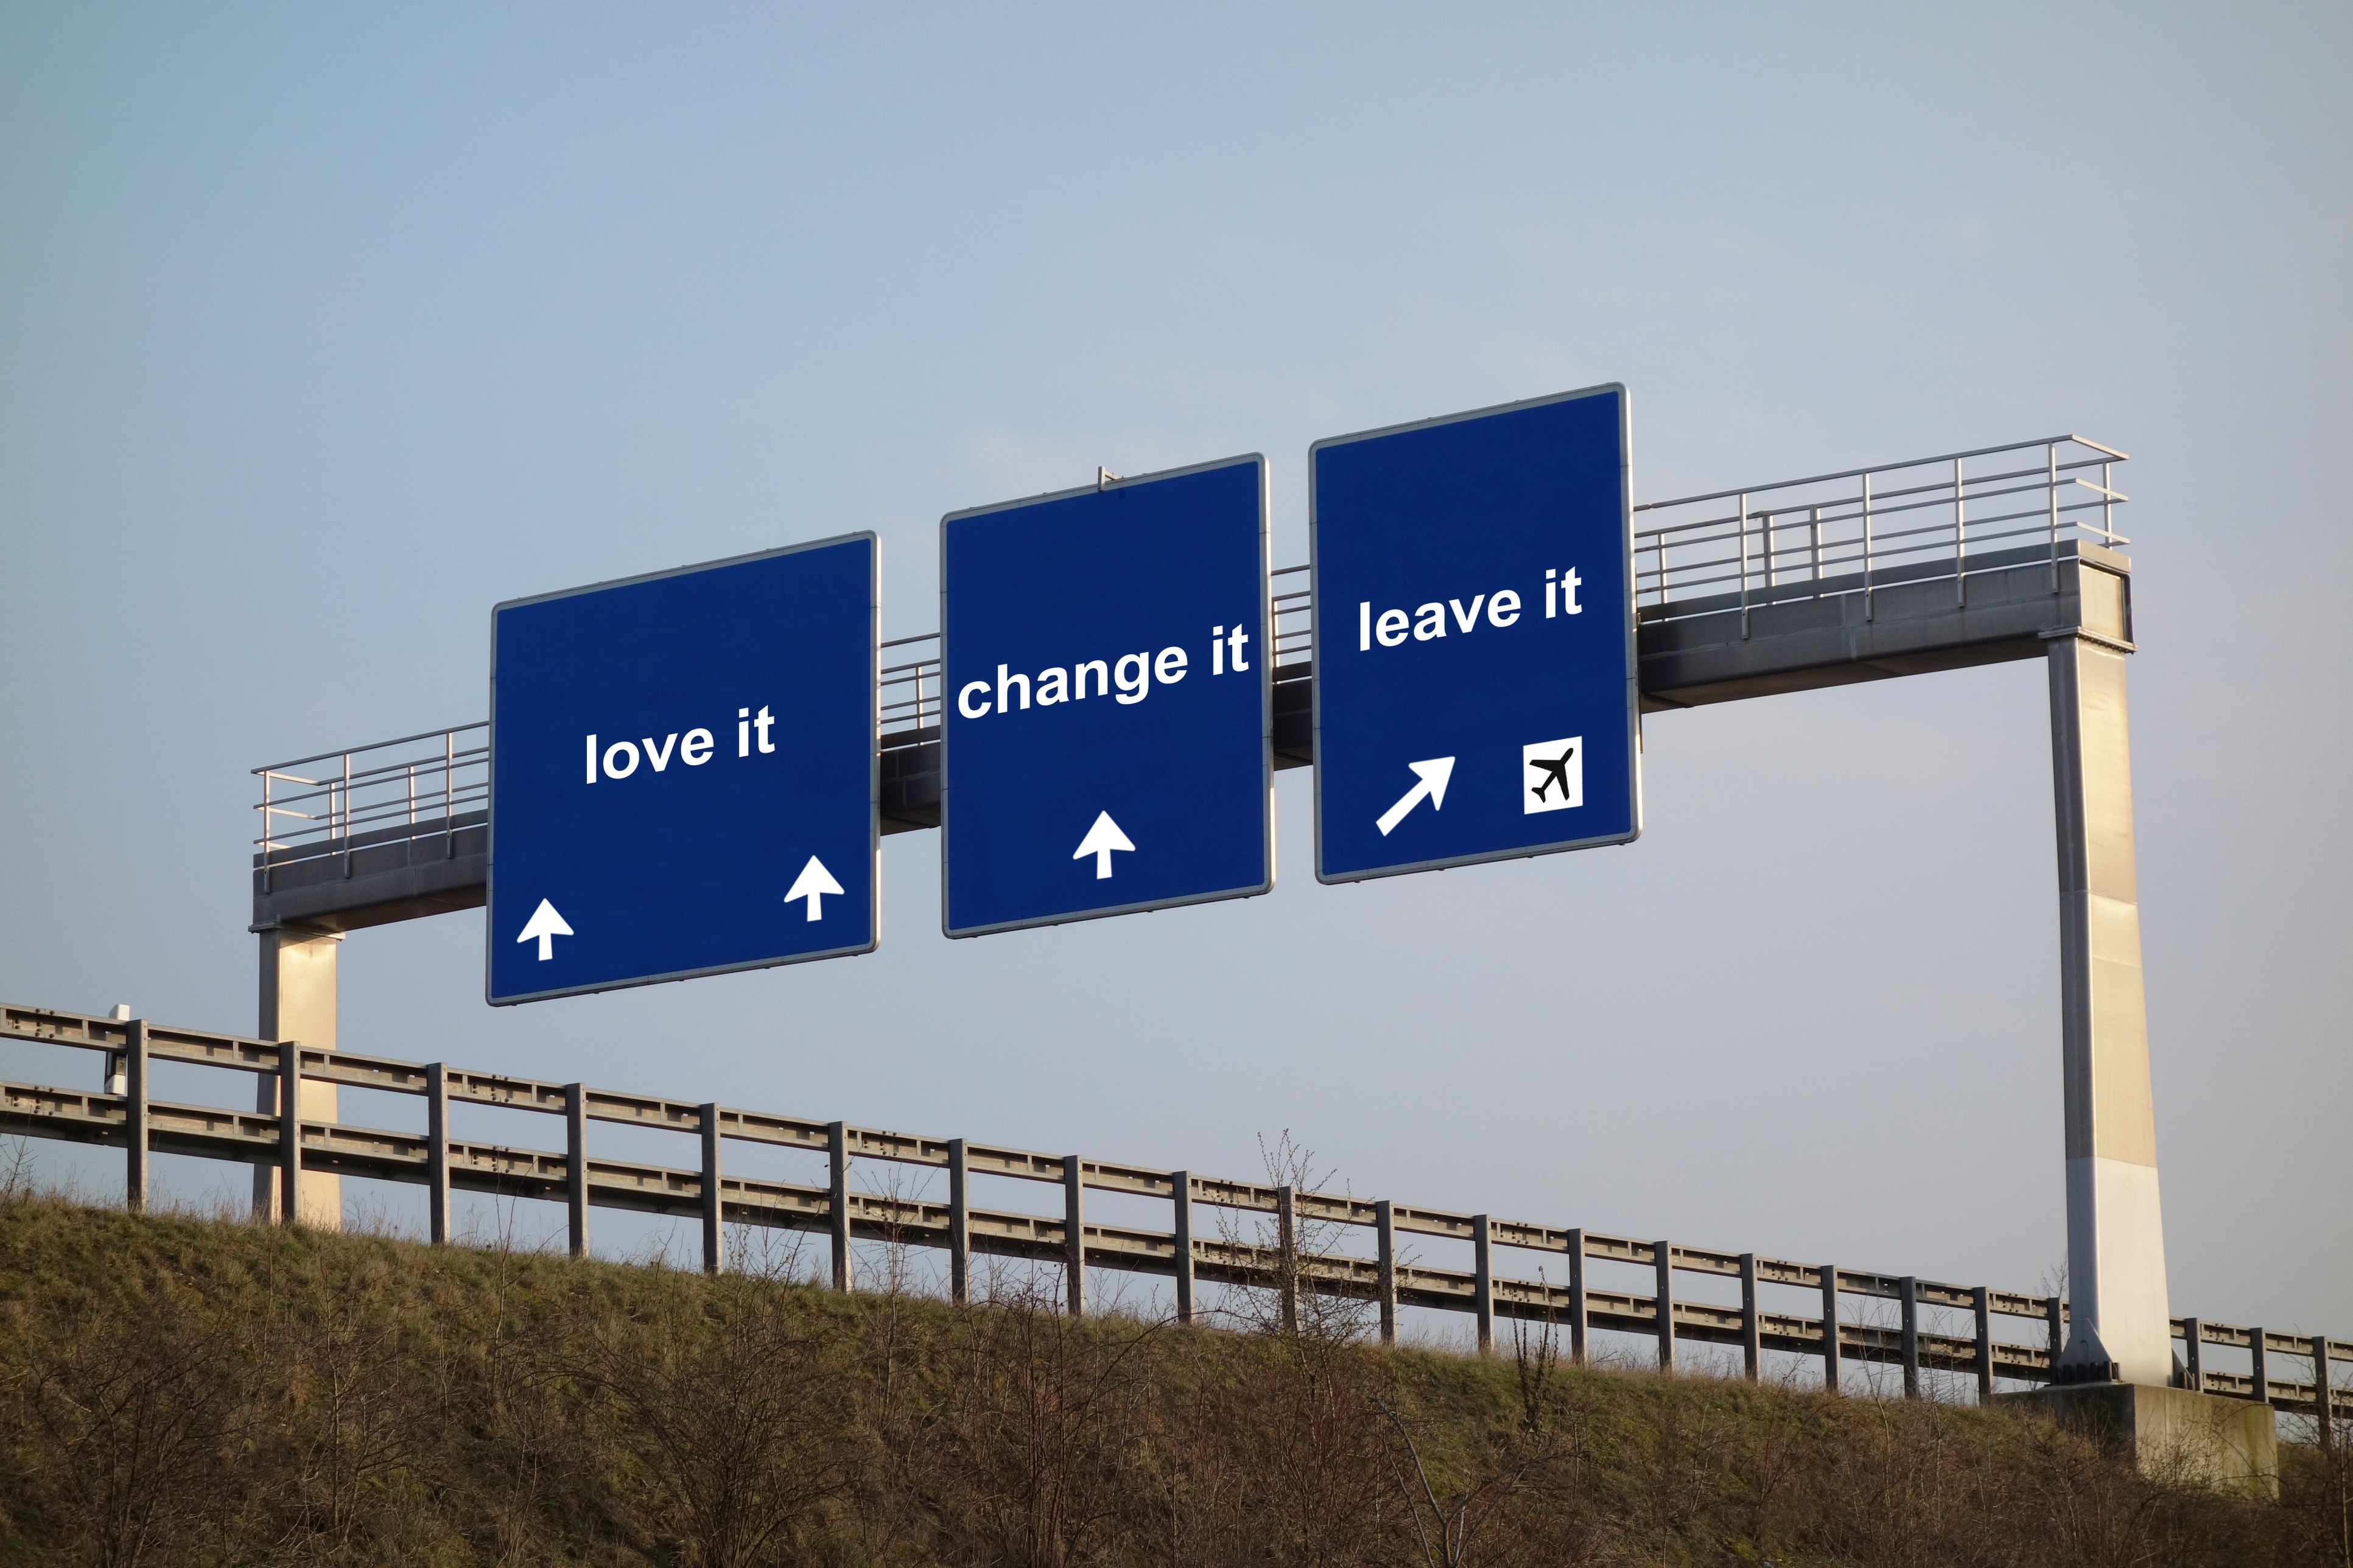 A photo of road signs showing we have the choice to love, change or leave situations.